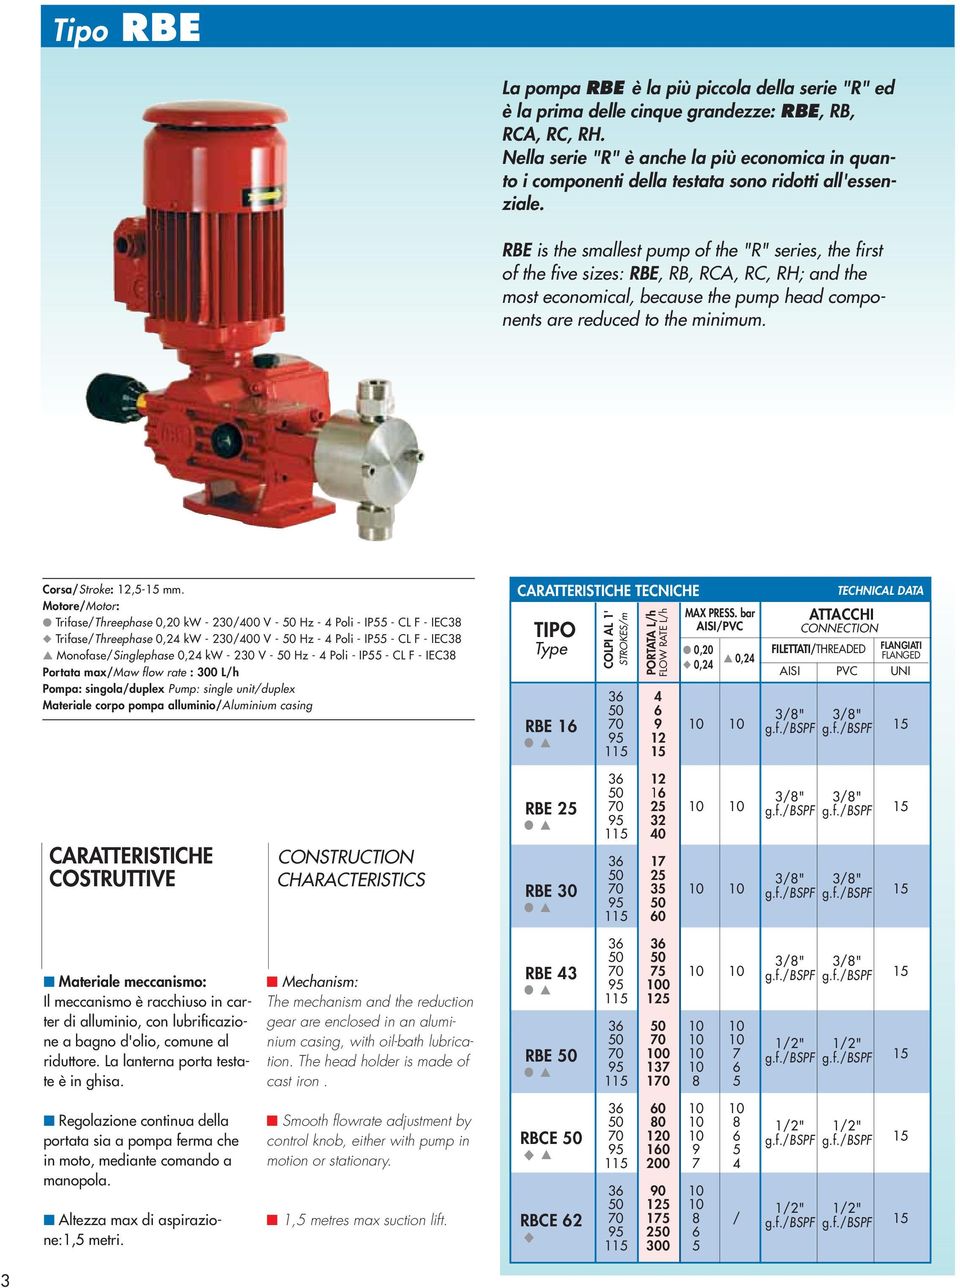 RBE is the smallest pump of the "R" series, the first of the five sizes: RBE, RB, RCA, RC, RH; and the most economical, because the pump head components are reduced to the minimum.